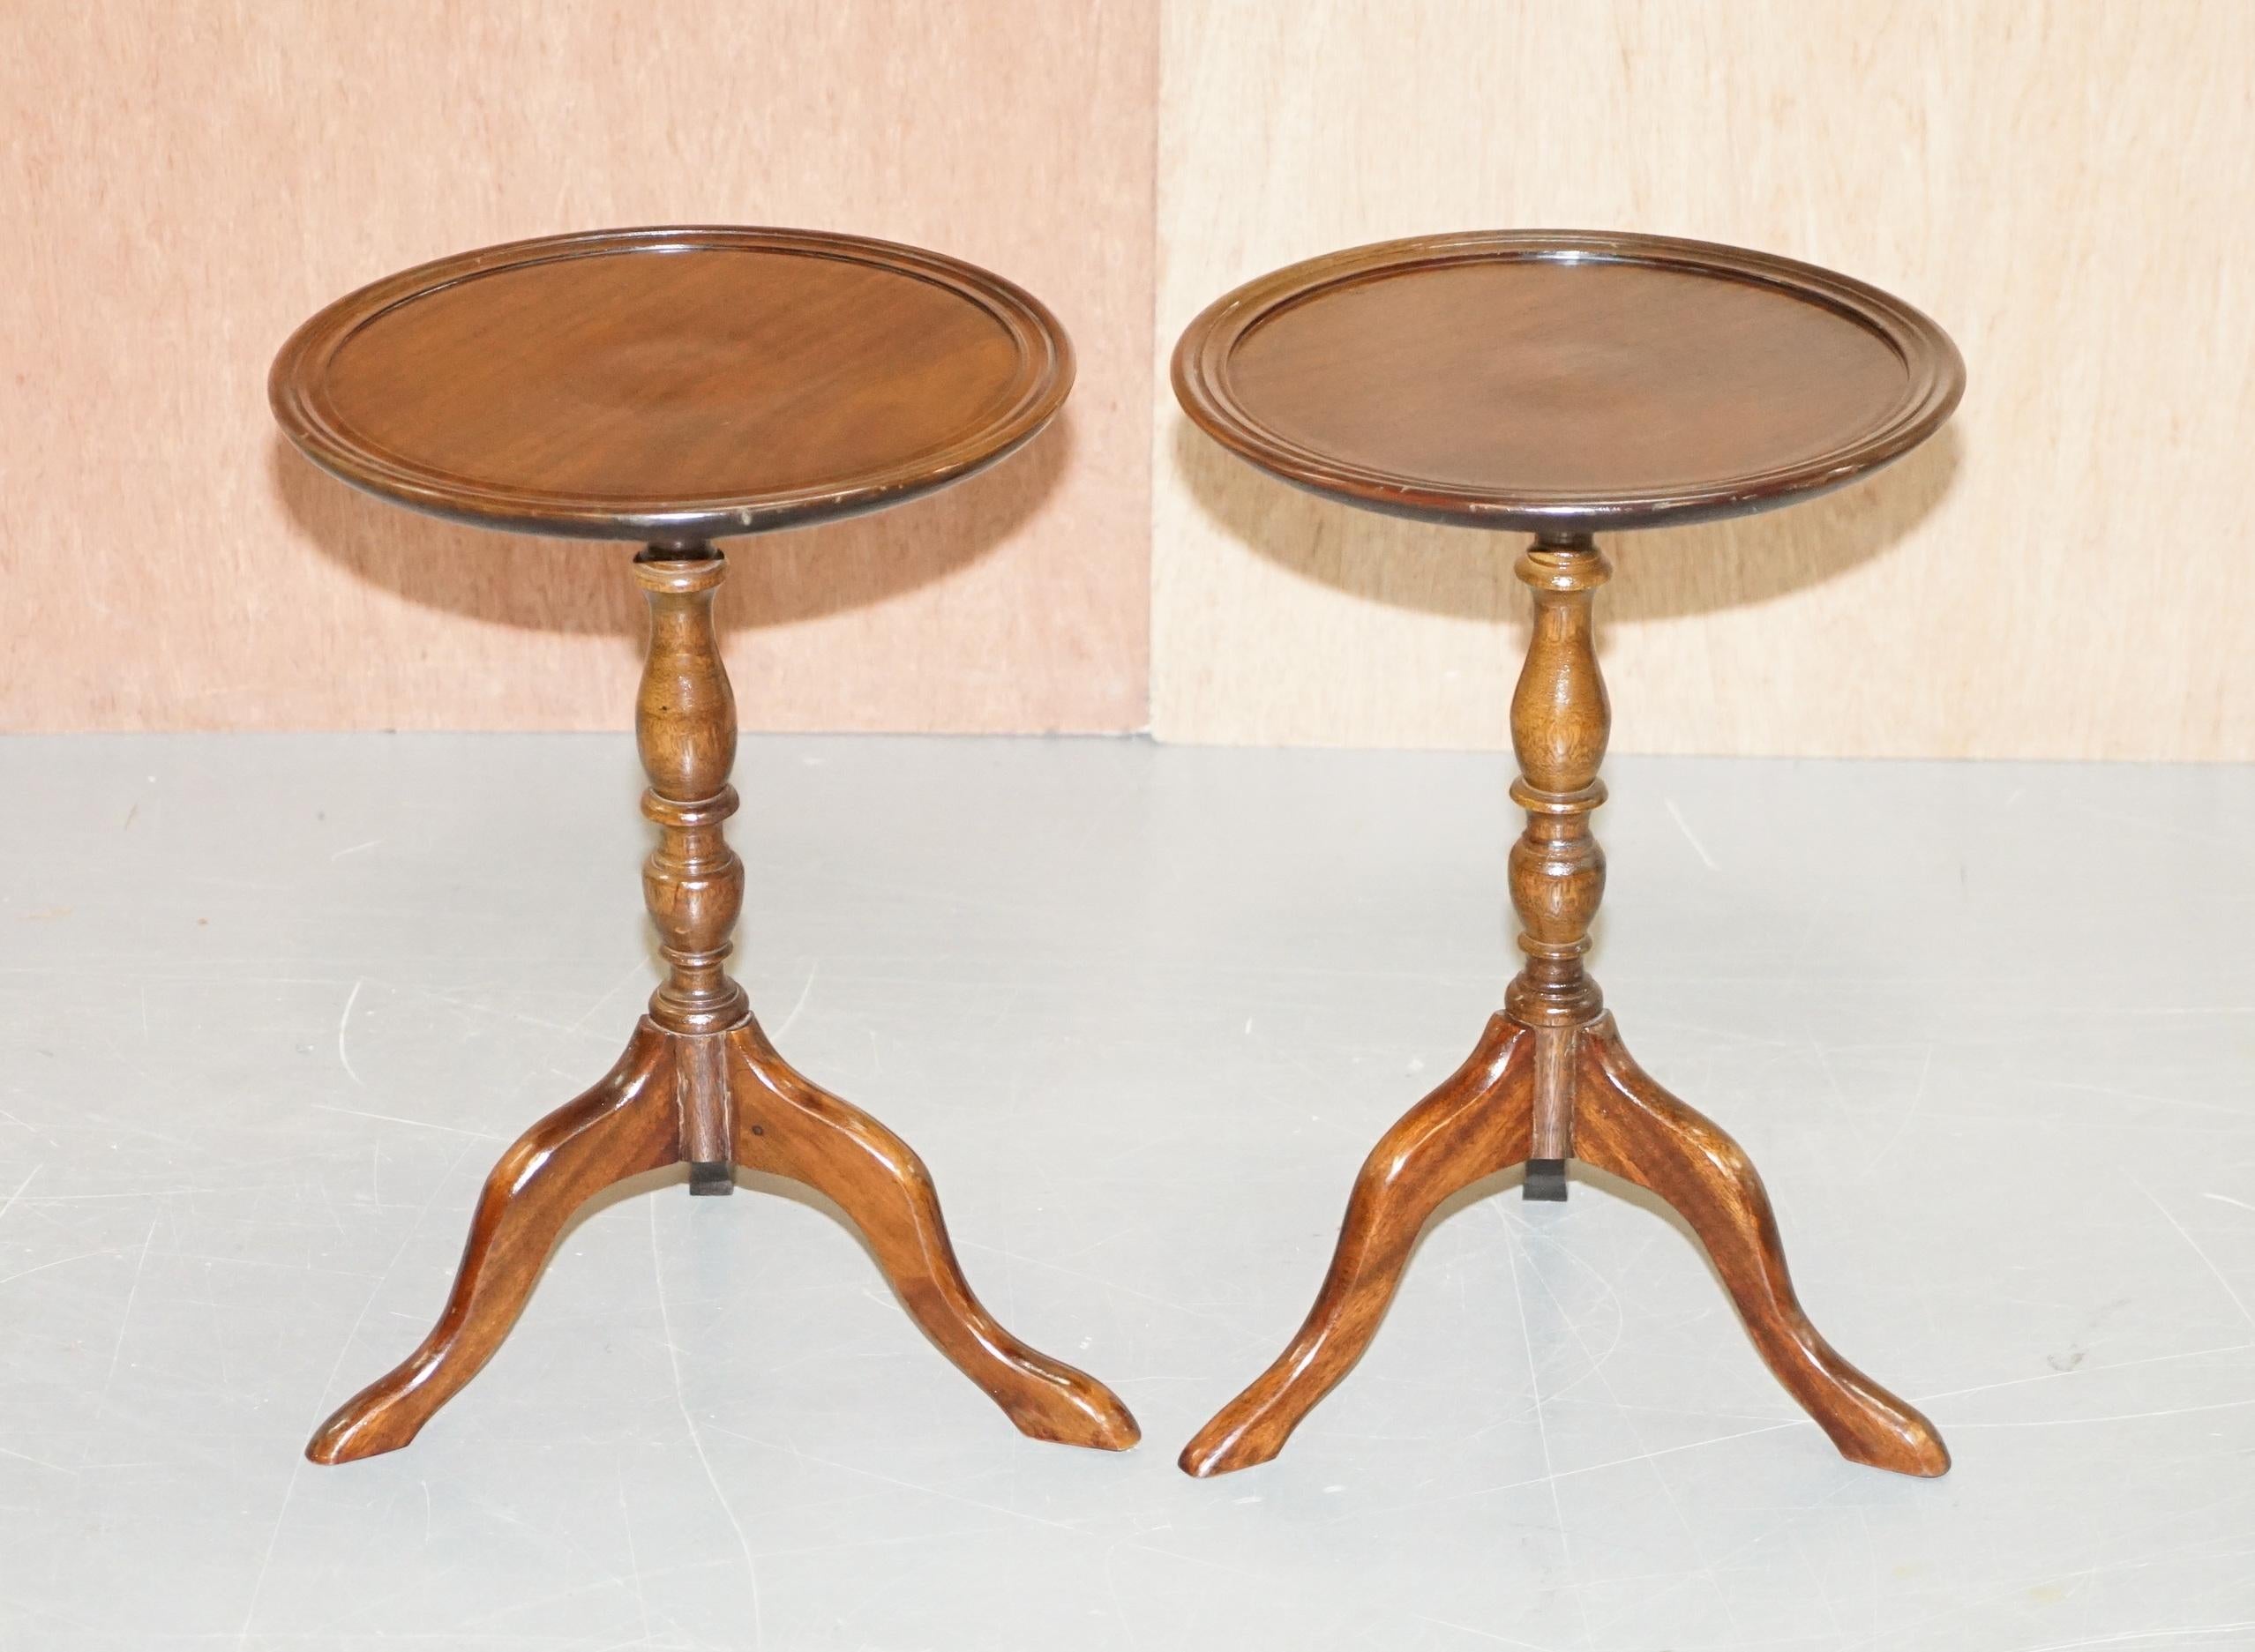 We are delighted to offer for sale this lovely pair of original late Victorian circa 1890 solid English mahogany side tables

A good looking and well made pair of tables with ornately turned bases

We have cleaned waxed and polished them from